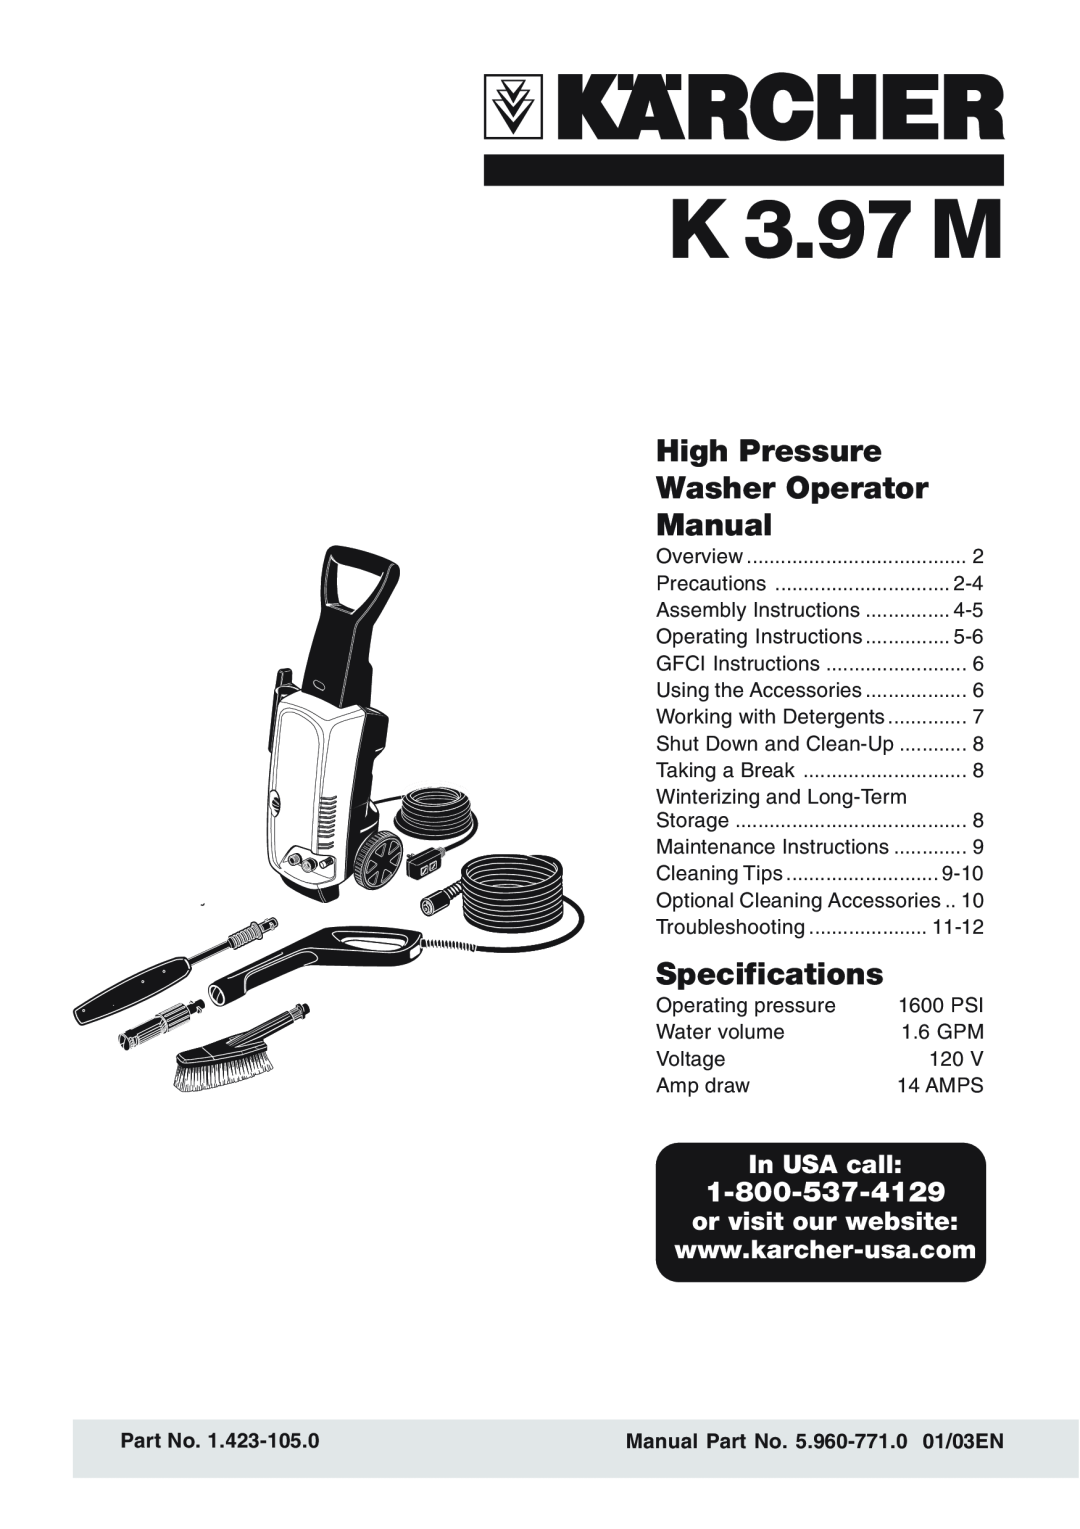 Karcher K 3.97 M specifications In USA call, or visit our website, Manual Part No. 5.960-771.0 01/03EN, High Pressure 